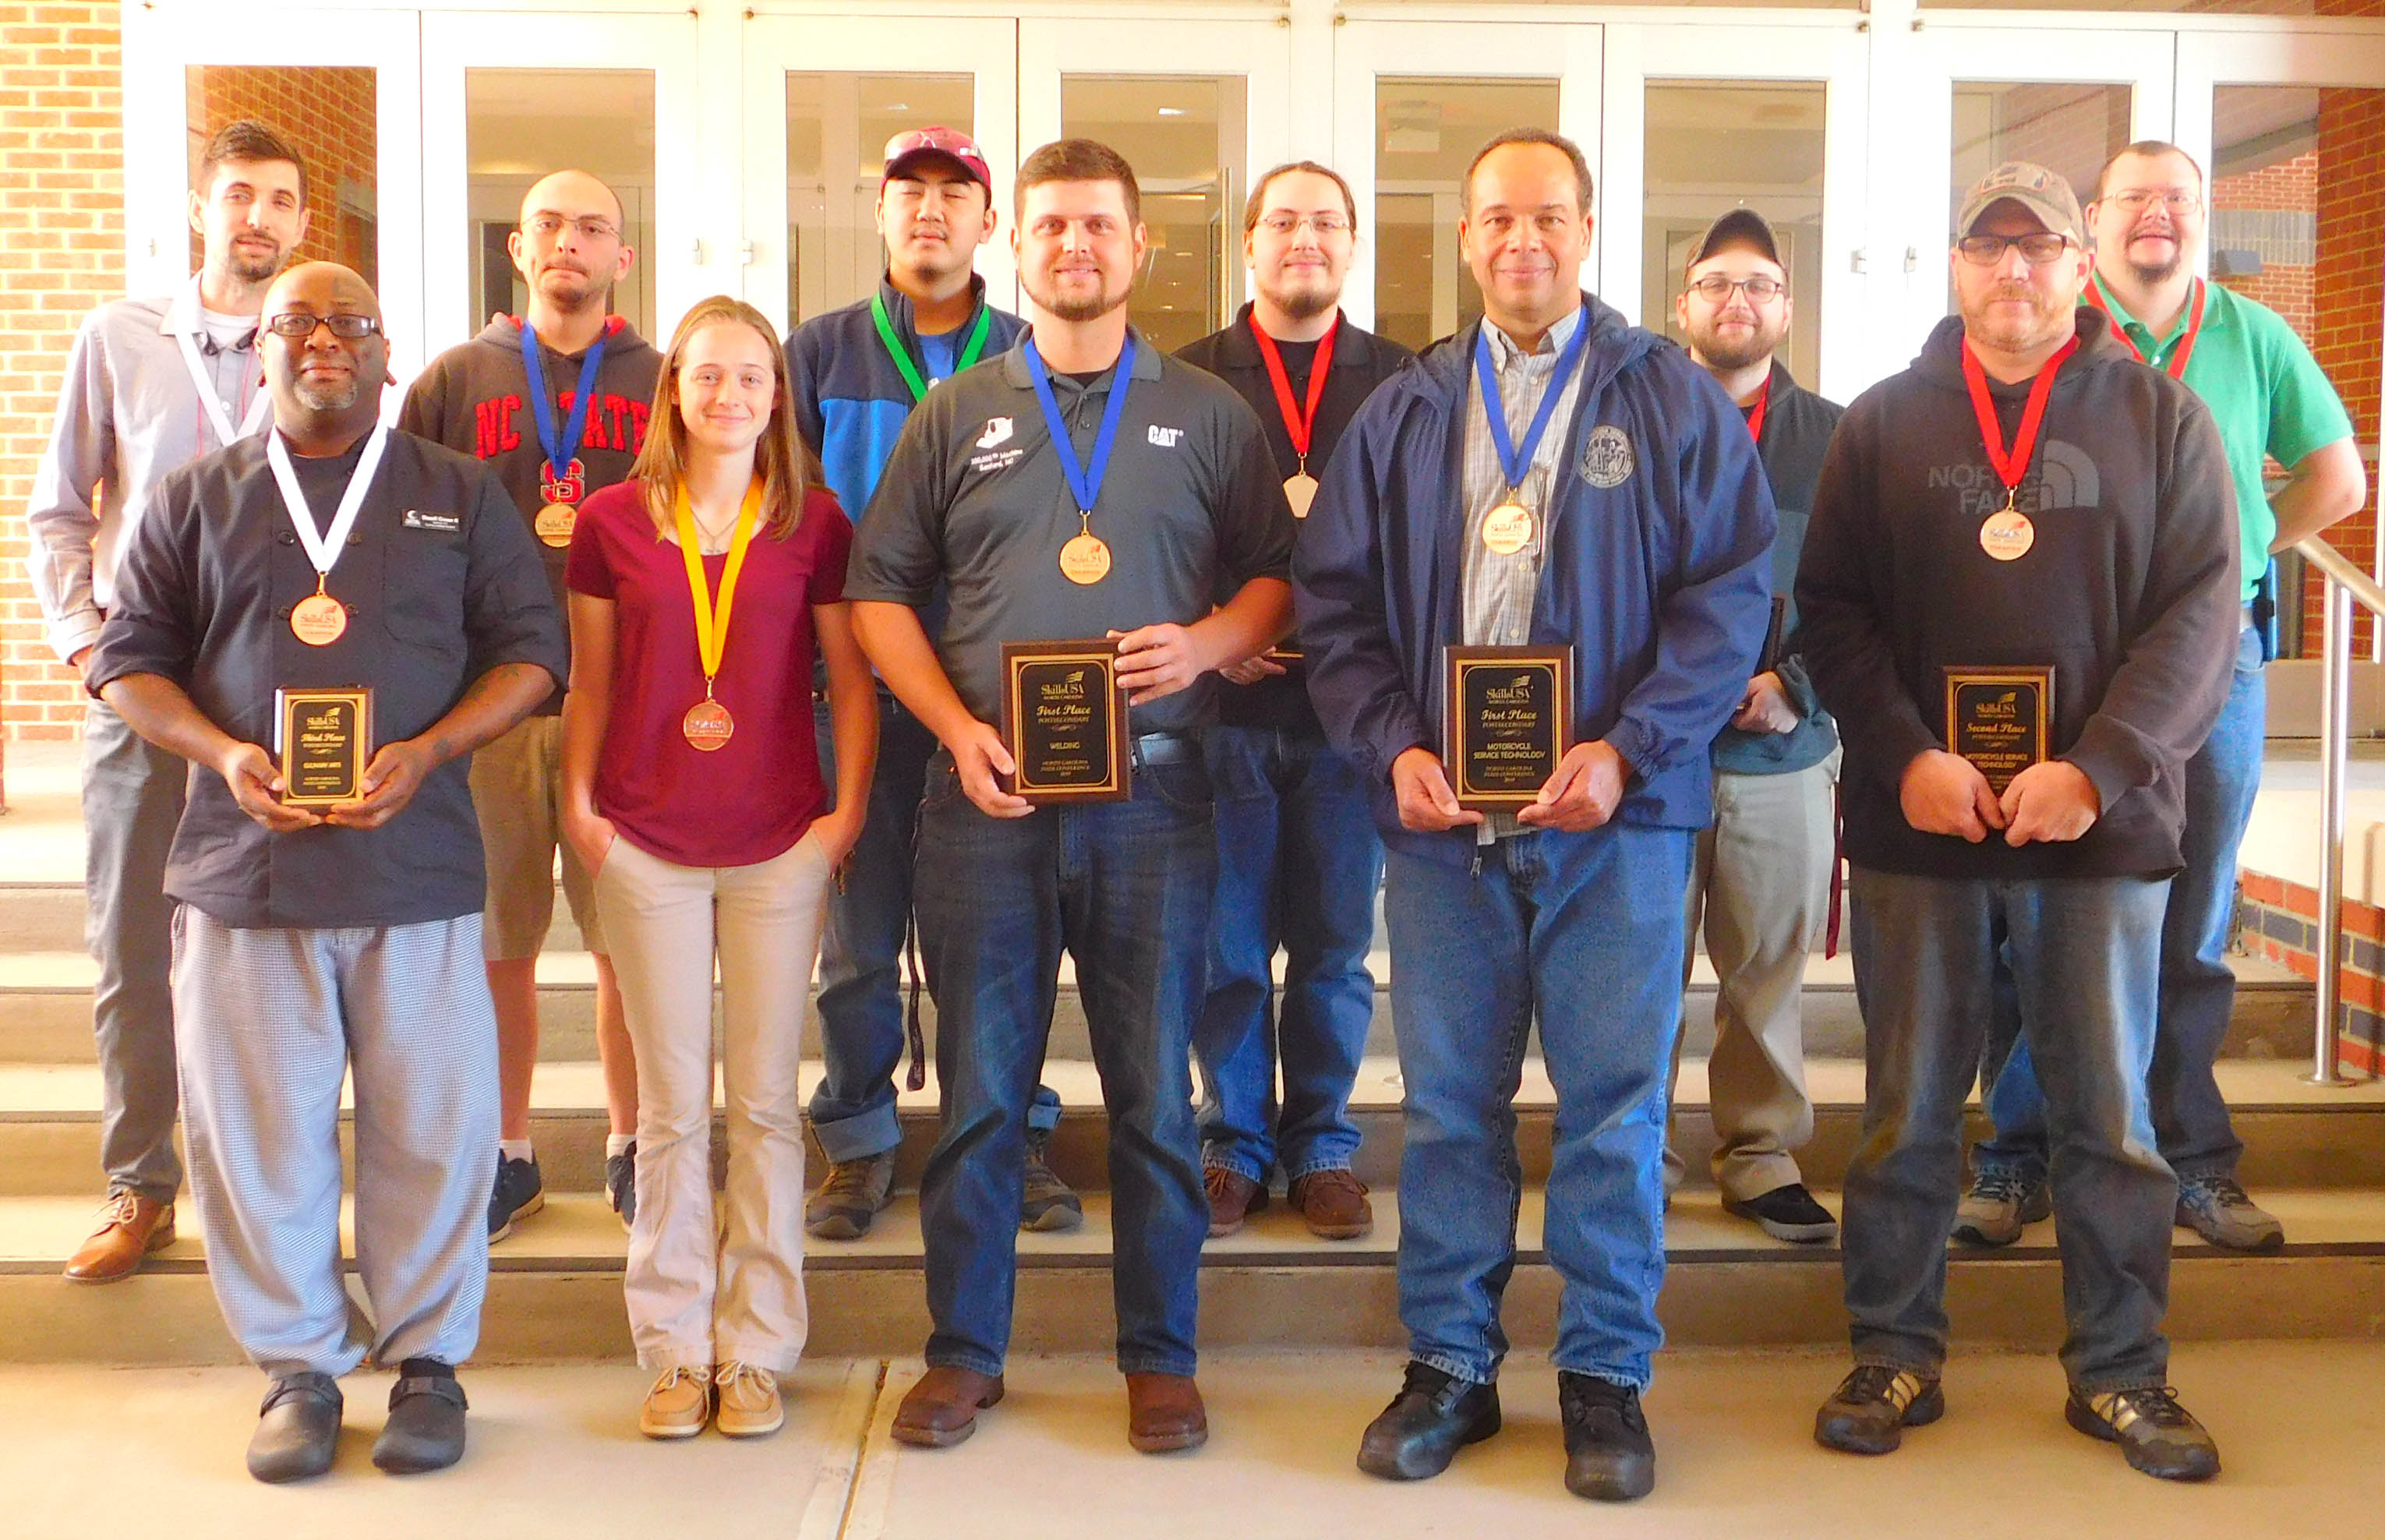 Click to enlarge,  These Central Carolina Community College students took state honors in April organized by SkillsUSA, an organization developing career and technical skills for students. They are, left to right: first row, Dazell Green, Elisabeth Finch, James Culbreth, Trevor Brown, and Kevin Alderson; second row, Justin Schrader, Zane Walker, Bryan Tran, Reece Isley, Jordan Norris, and Nathan Lamont. 